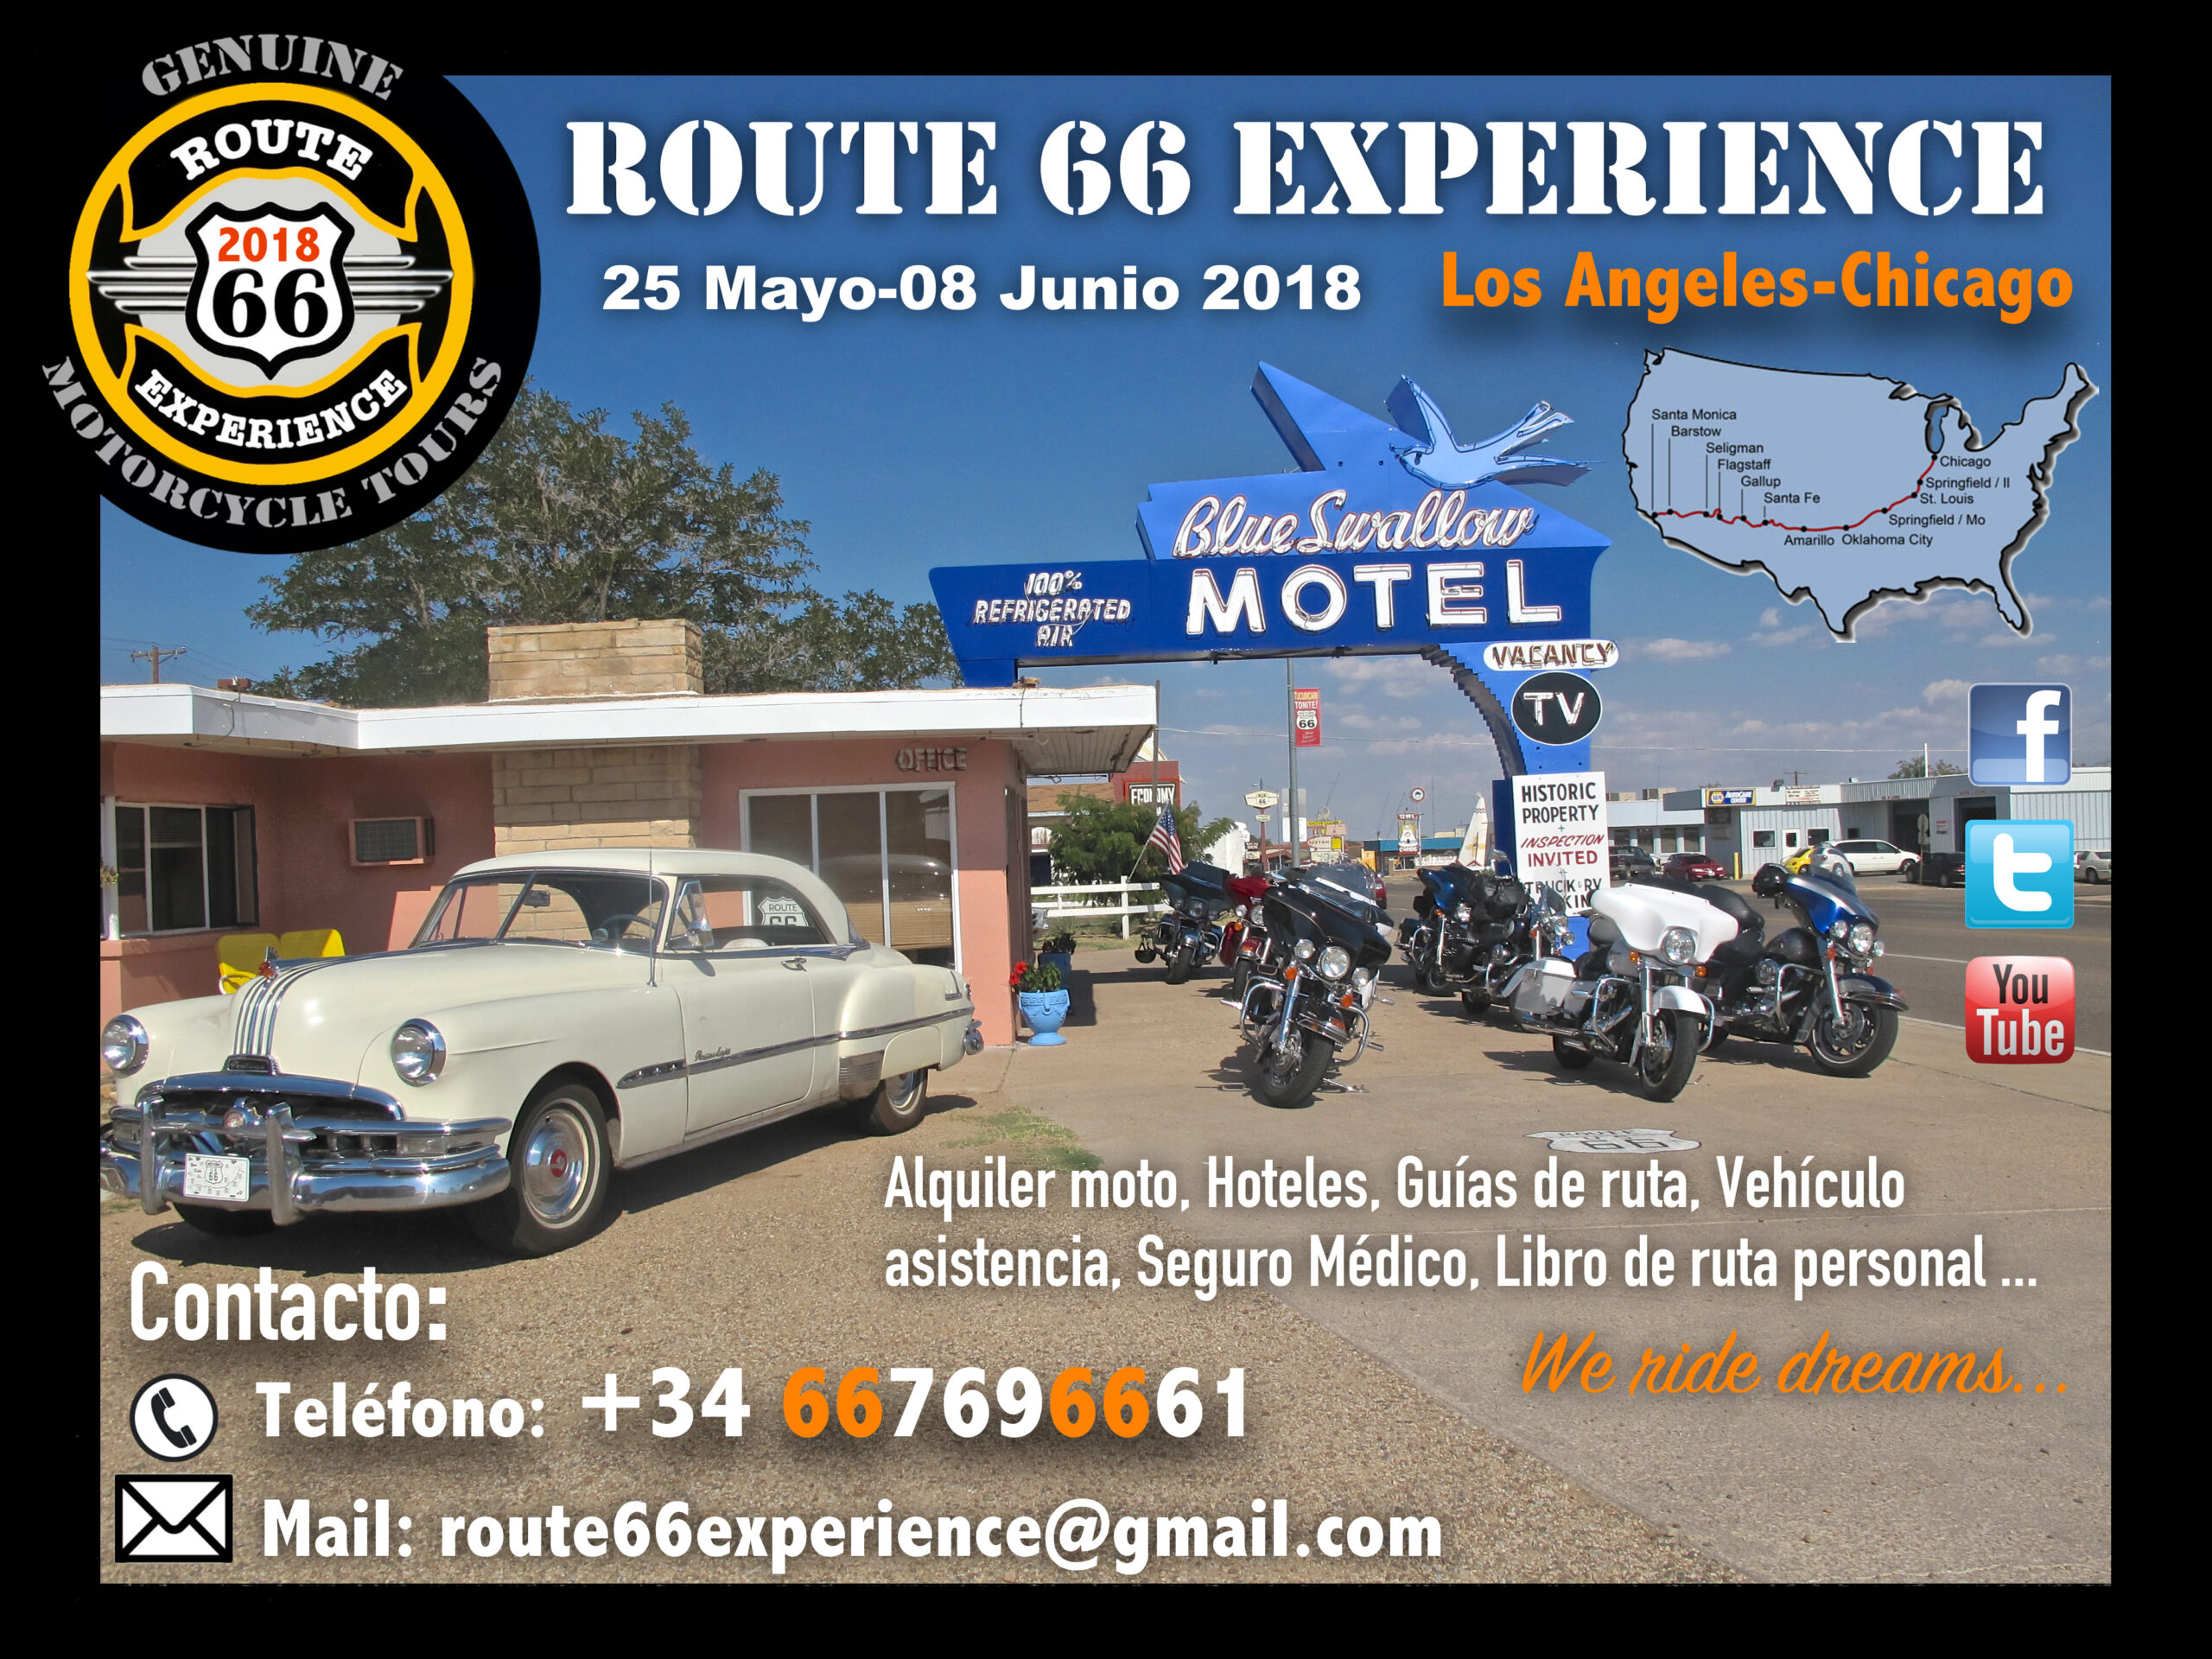 Route 66 Experience LA-Chicago Mayo 2018